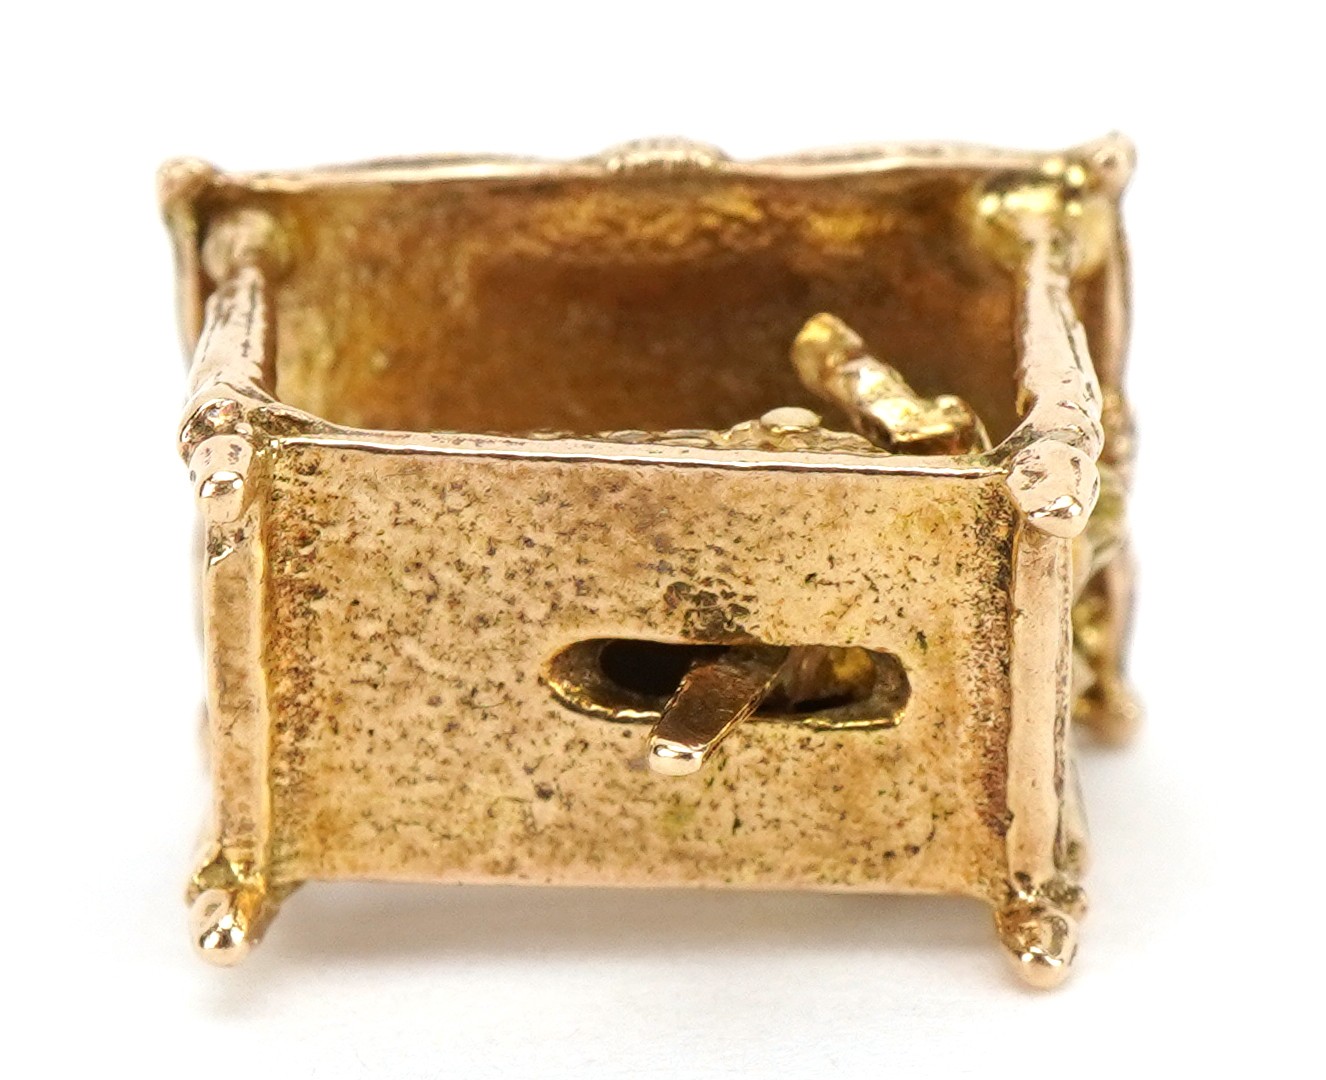 9ct gold four poster bed charm with two figures, 1.7cm wide, 4.4g - Image 4 of 4